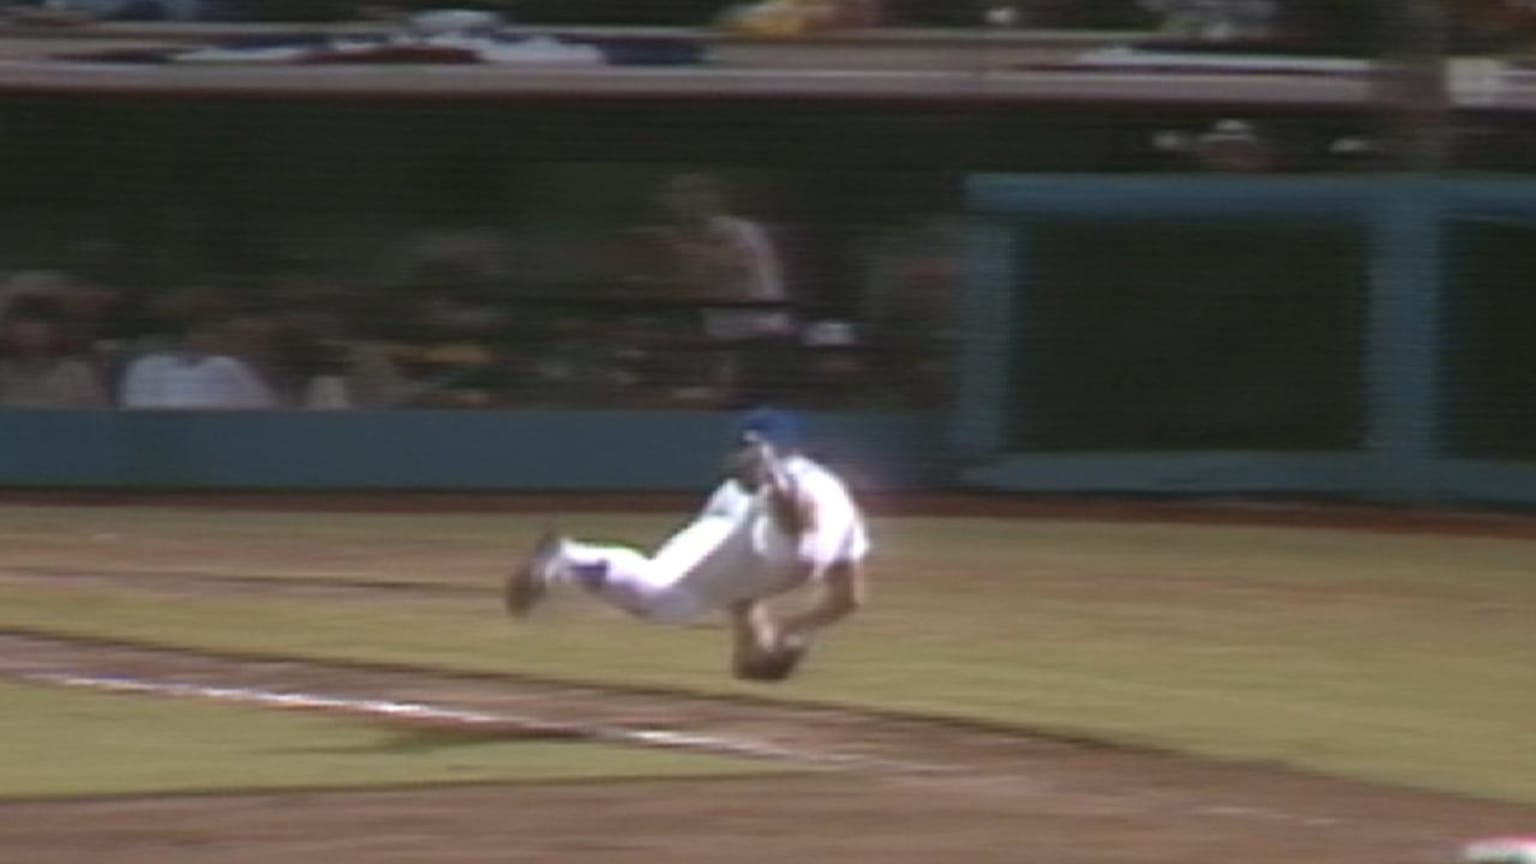 Cey's diving double play, 10/23/1981